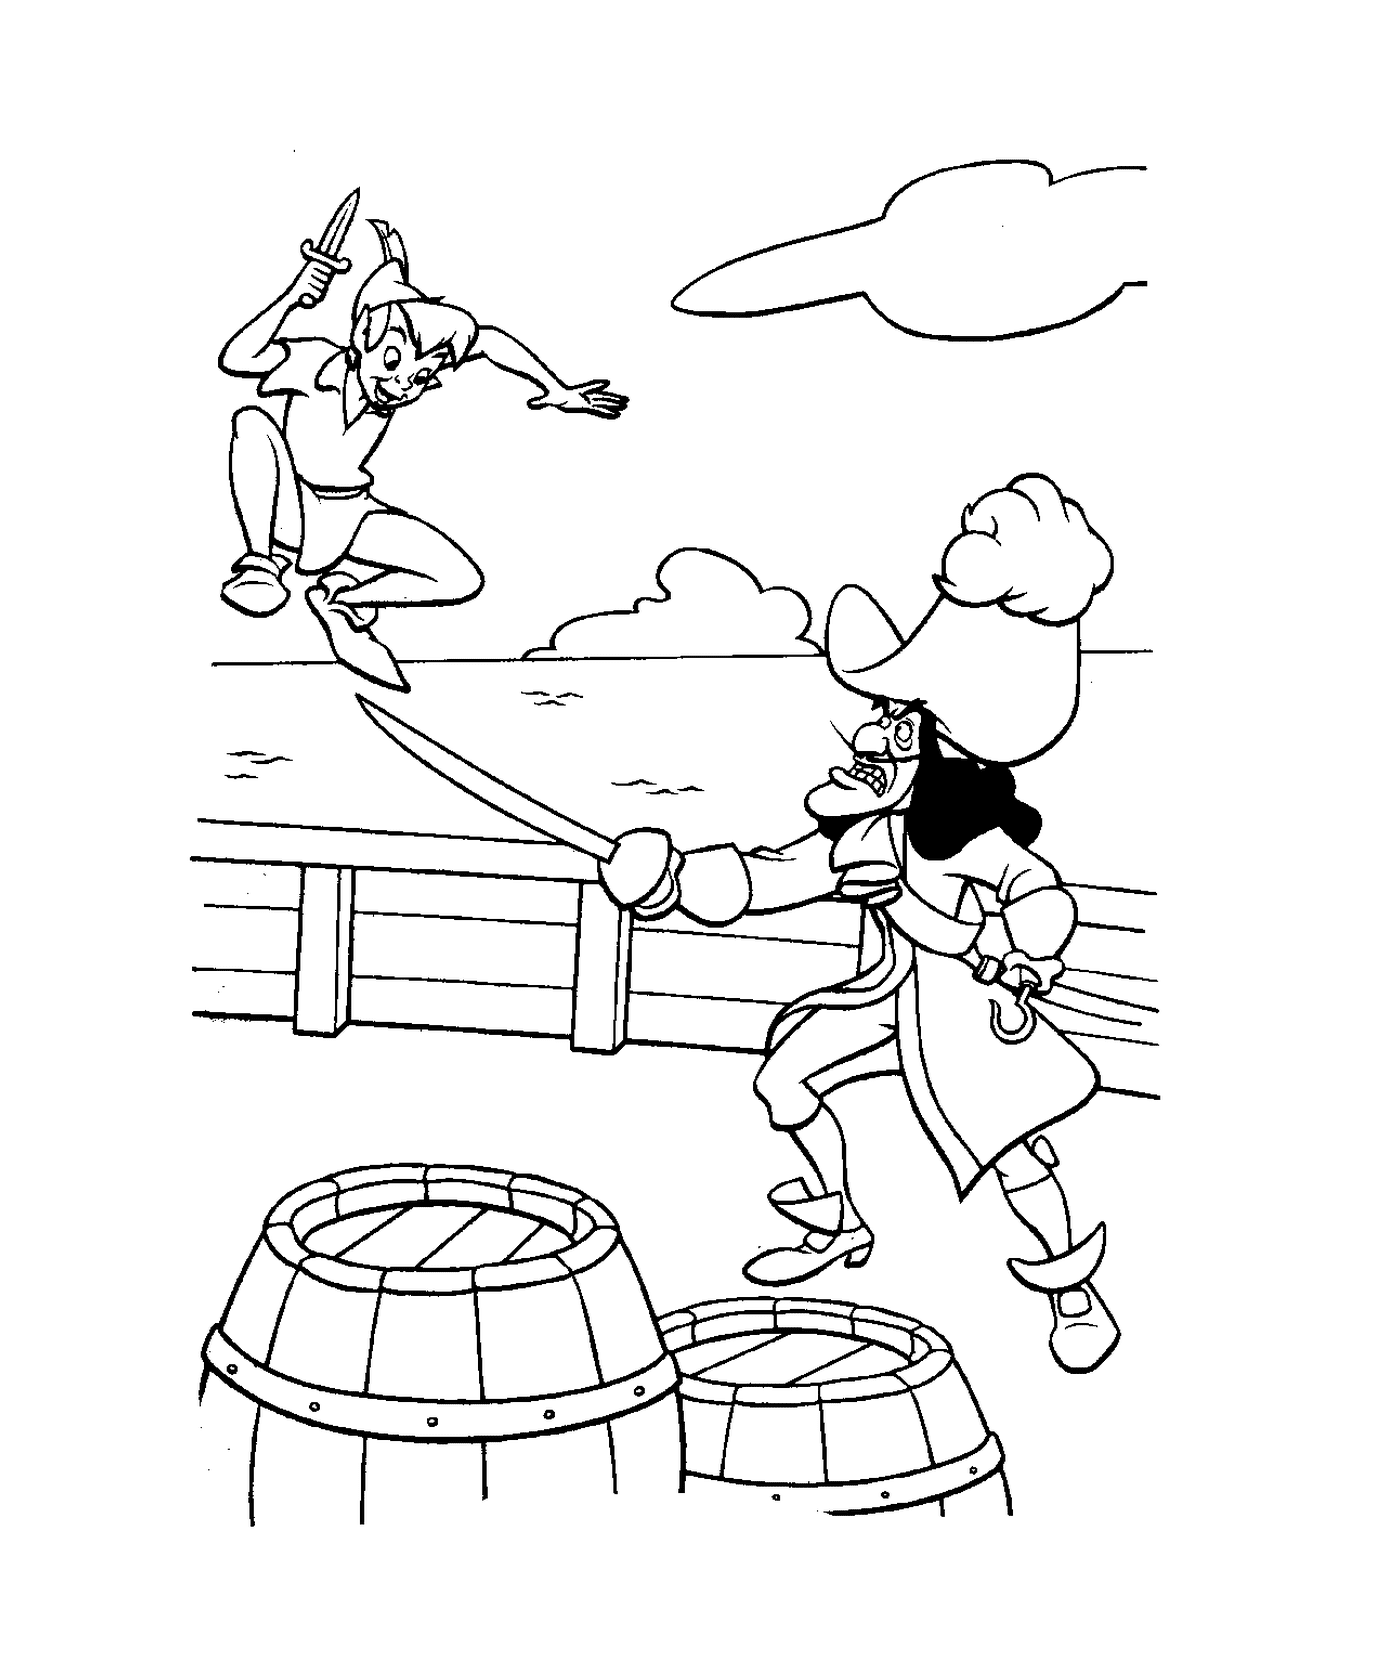  Peter Pan fights pirate on boat 